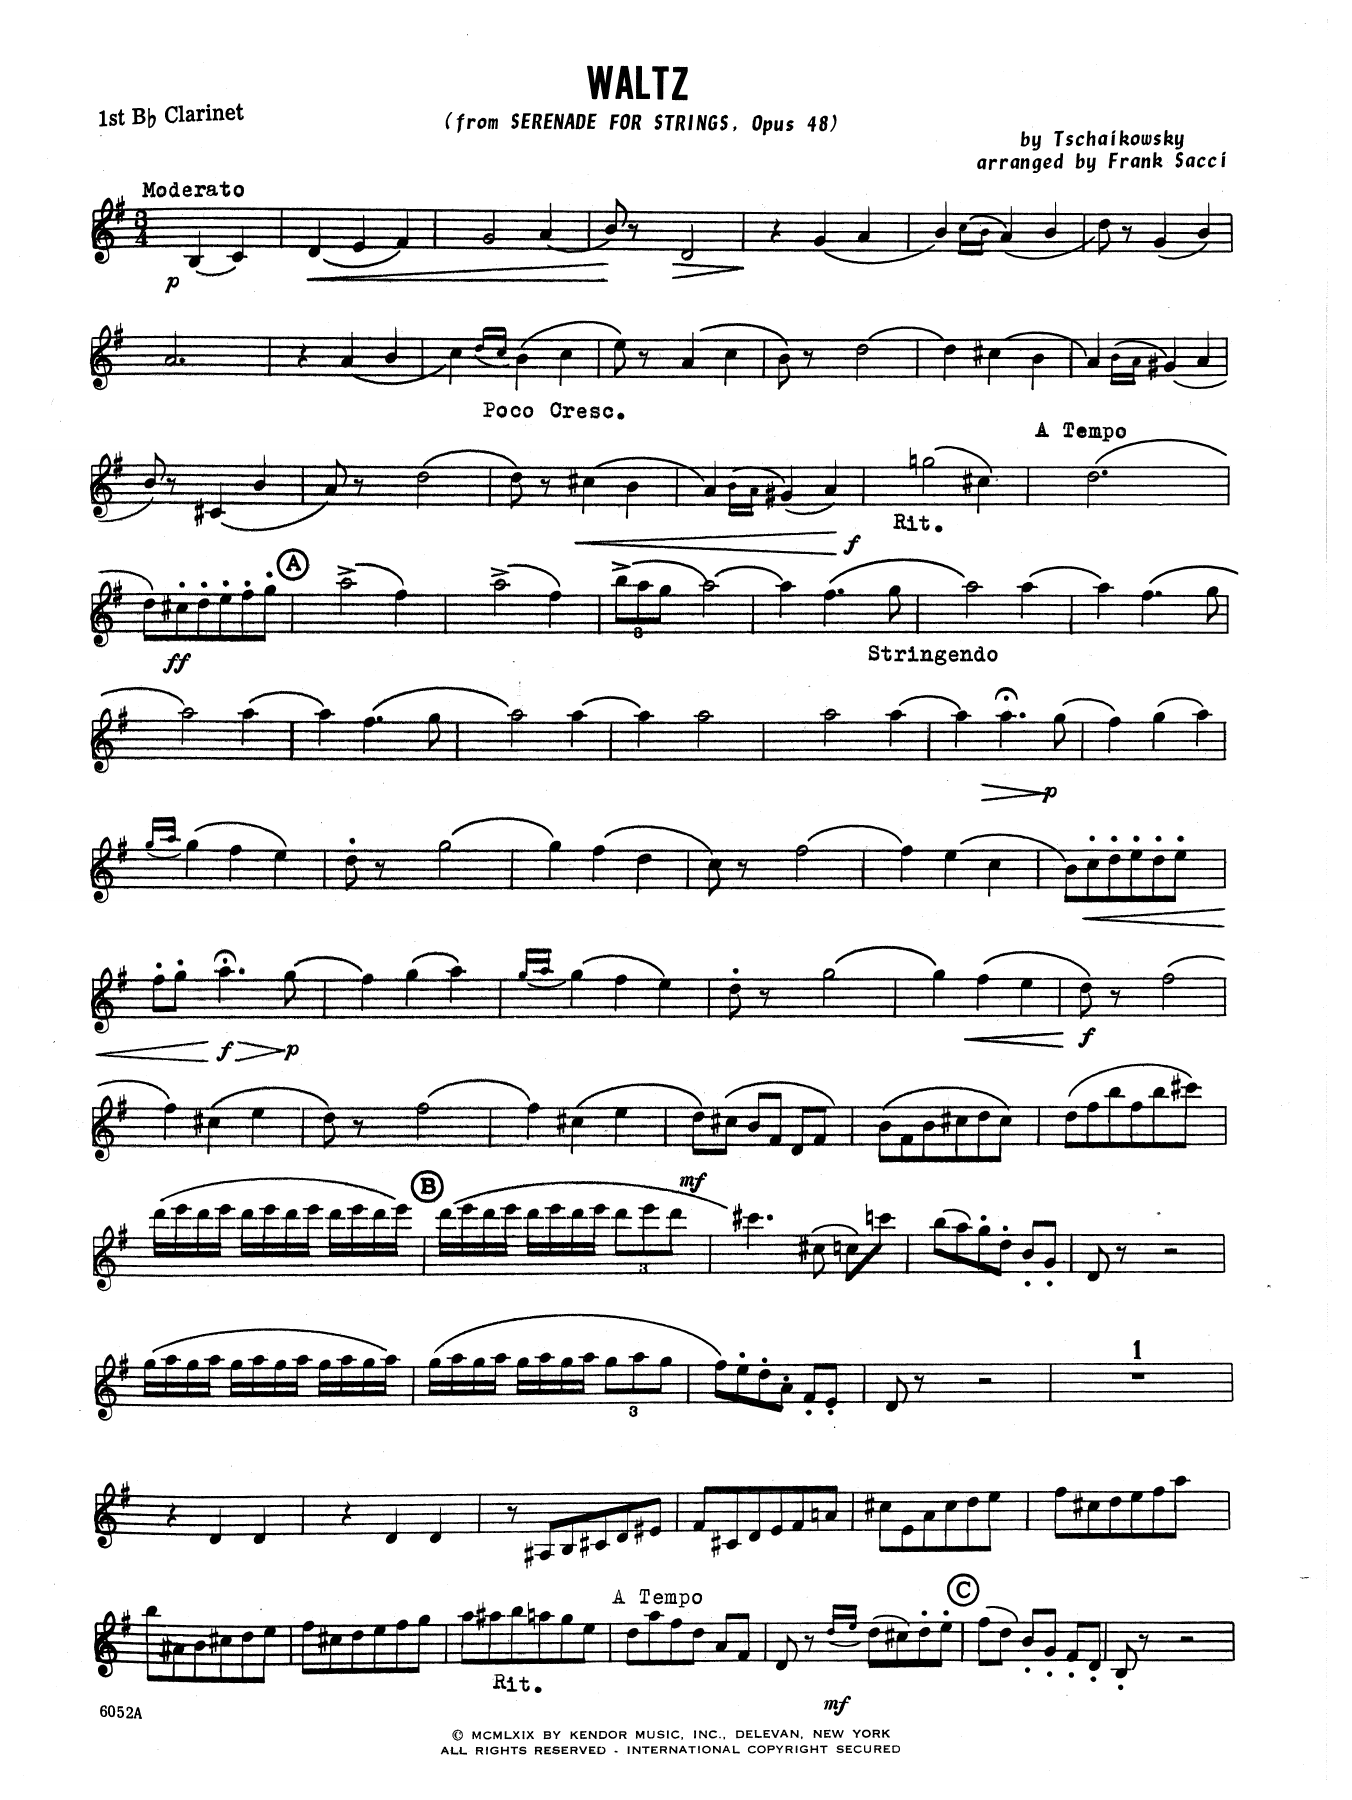 Download Frank Sacci Waltz From Serenade For Strings Op. 48 Sheet Music